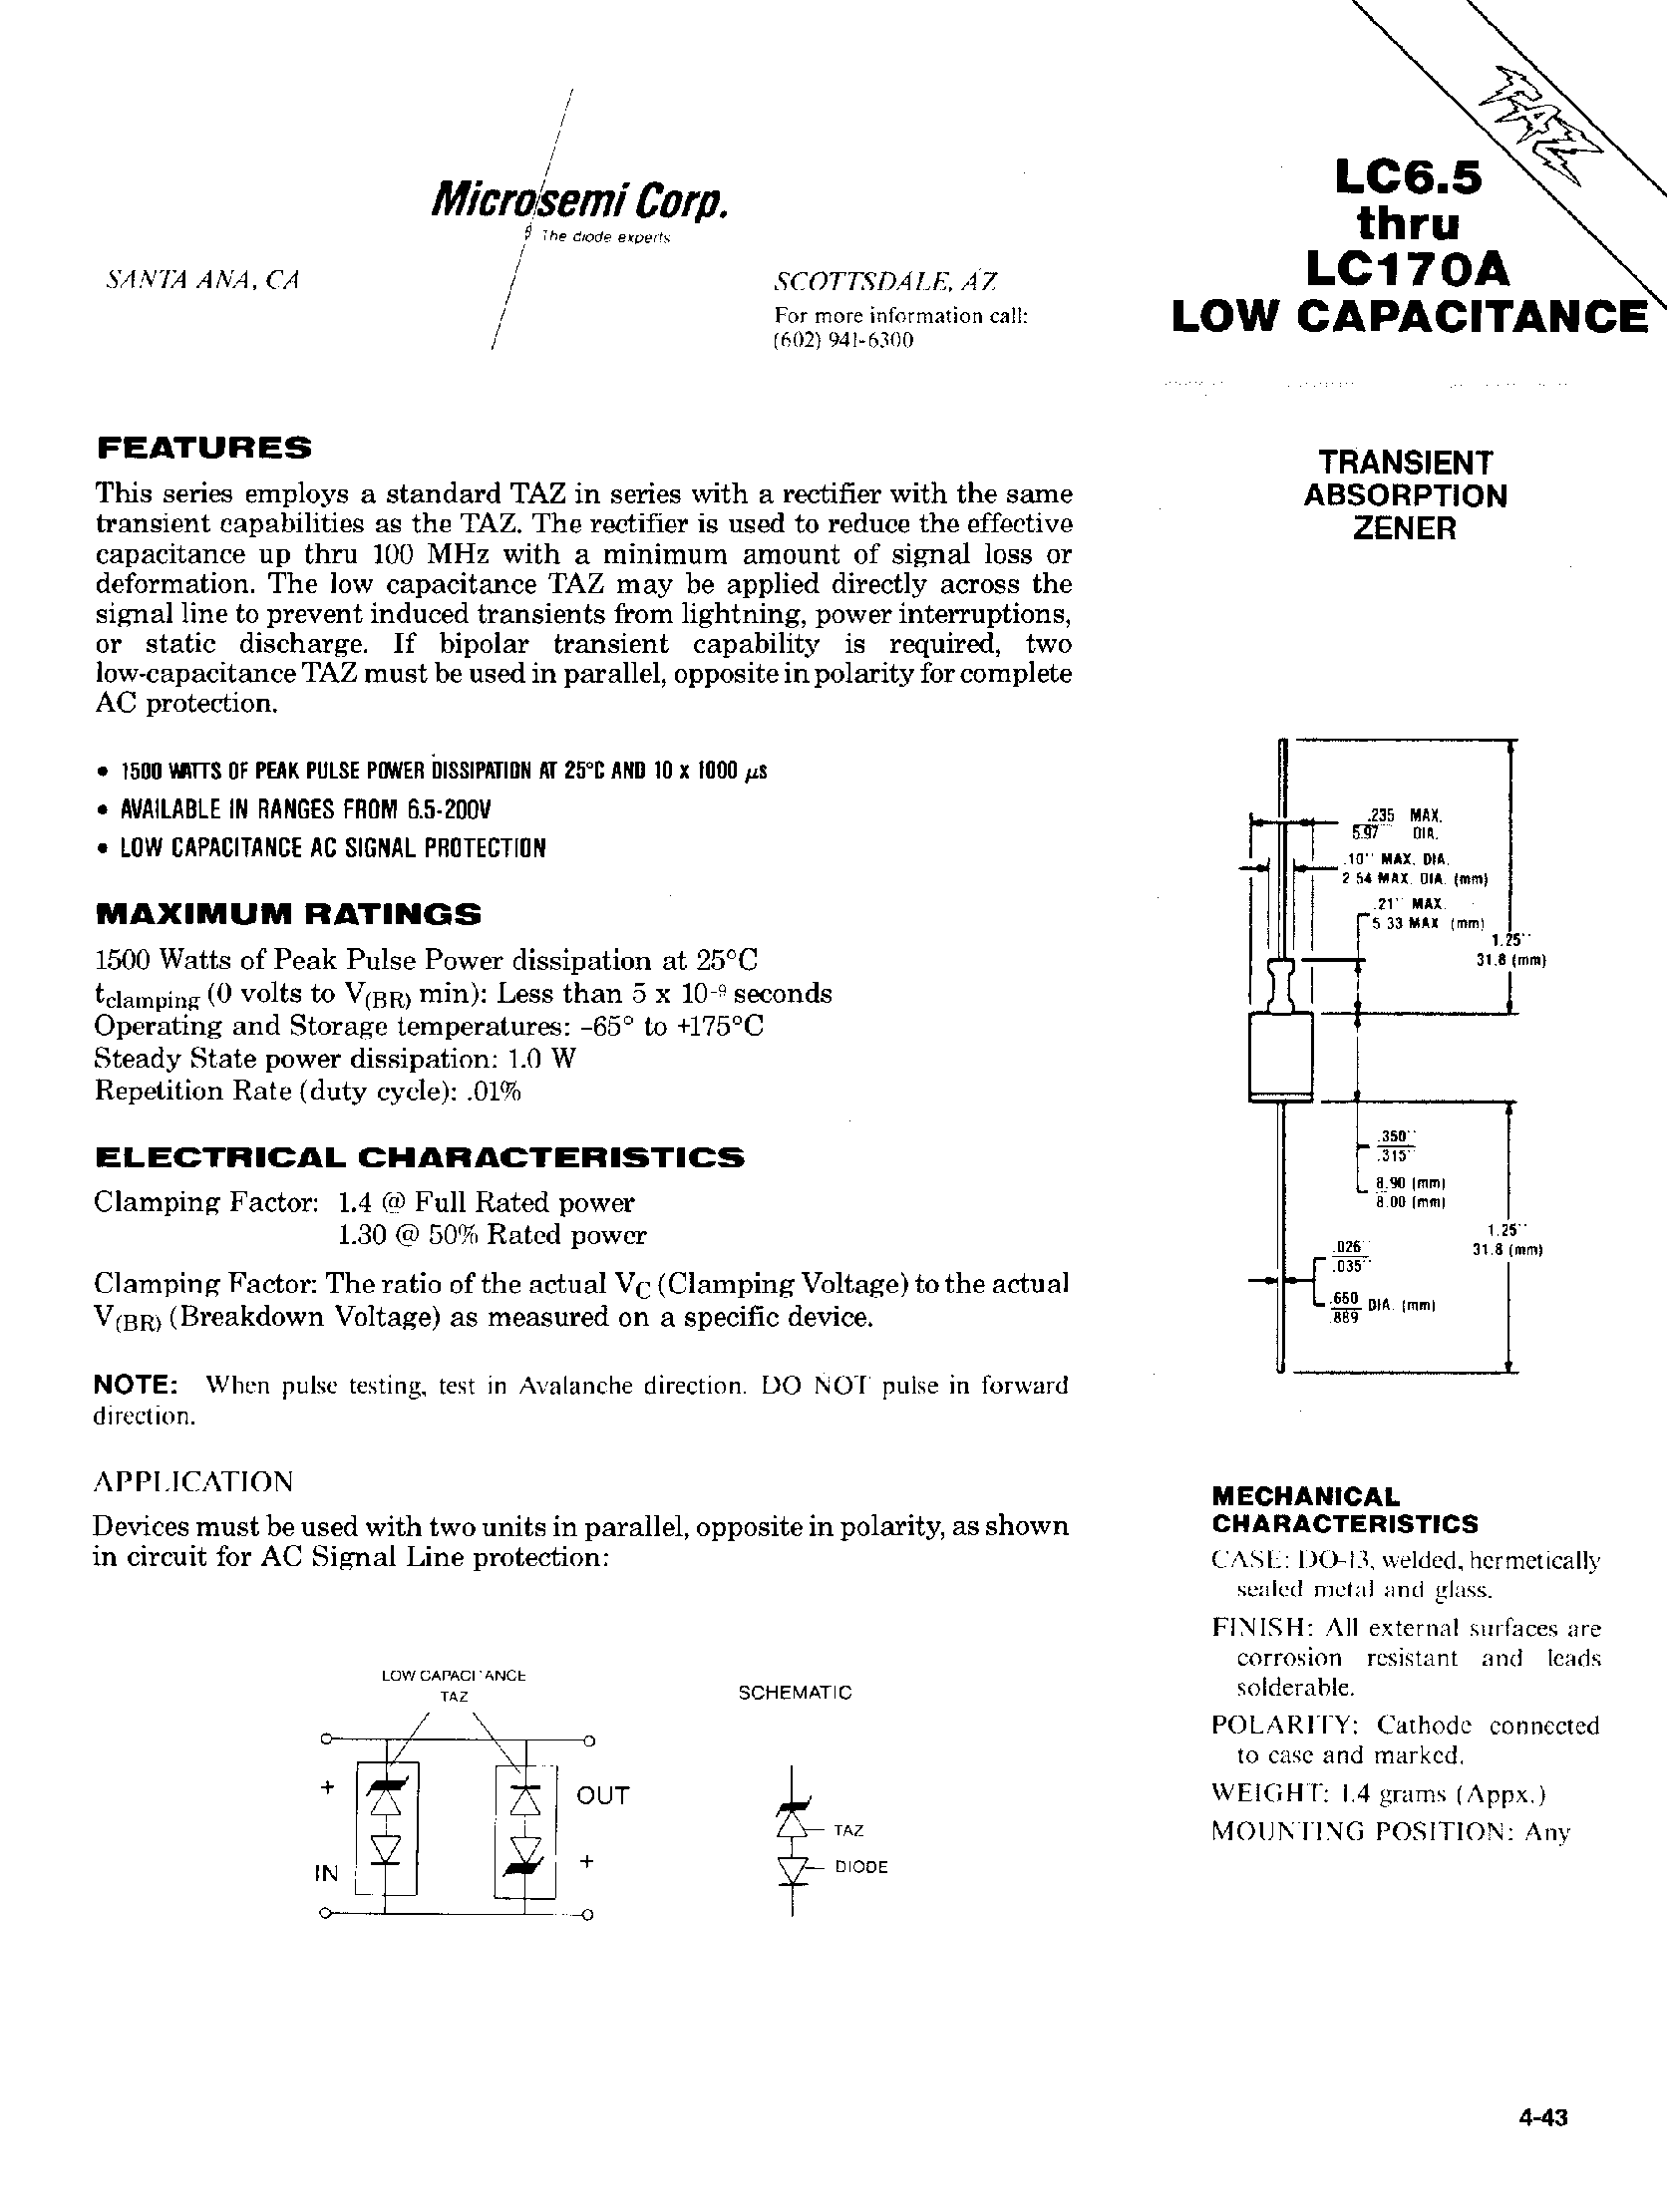 Даташит LC170A - TRANSIENT ABSORPTION ZENER страница 1